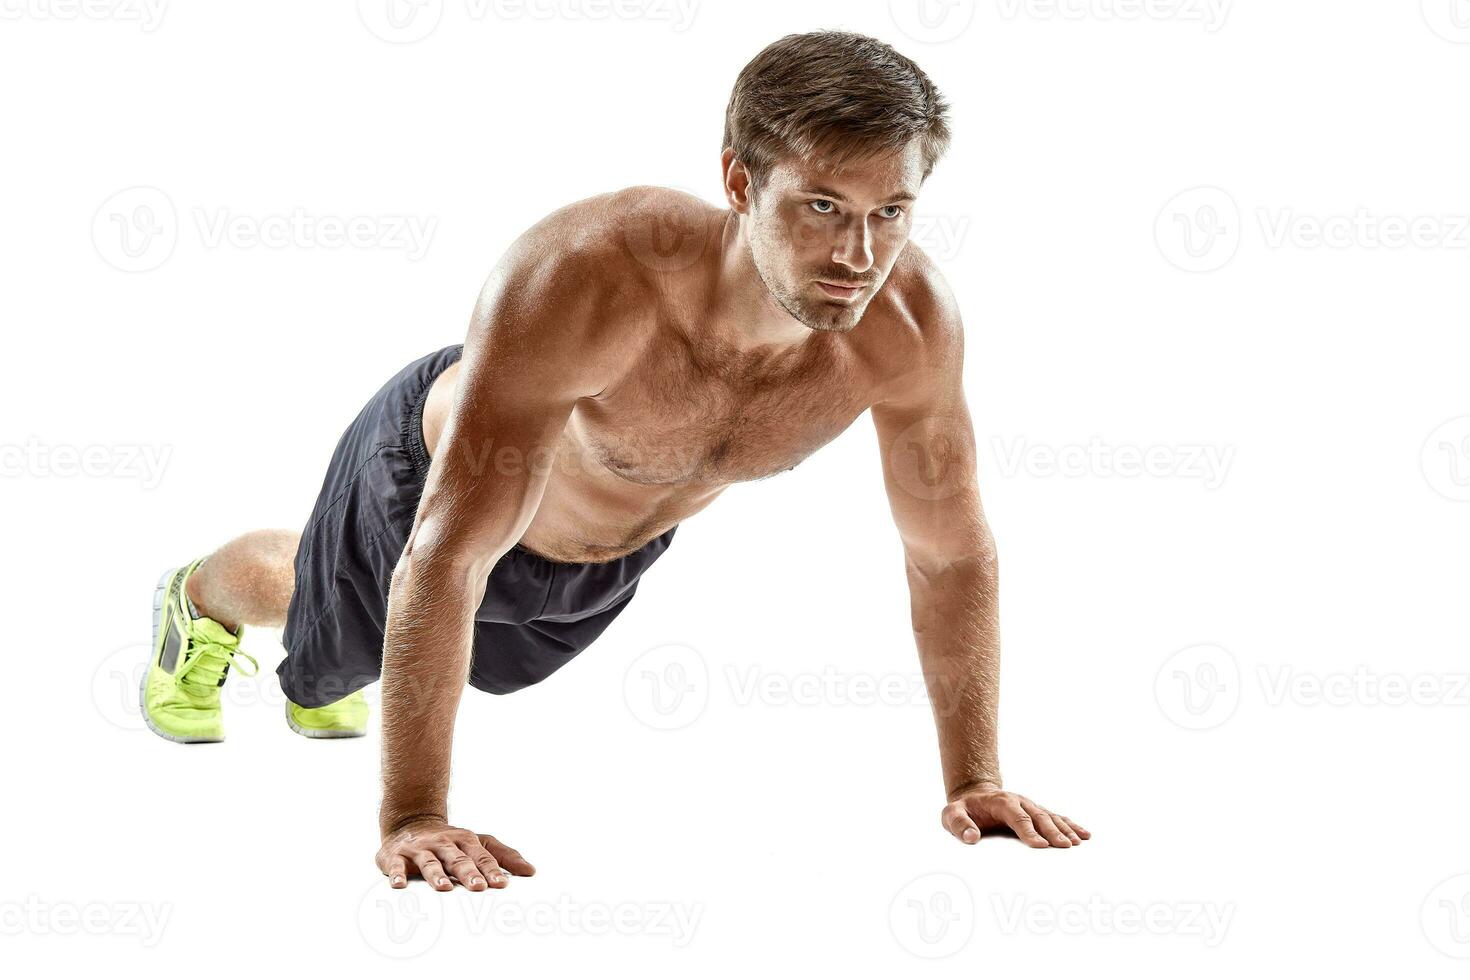 Push up fitness man doing push-up bodyweight exercise on gym floor. Athlete working out chest muscles strength training indoors photo